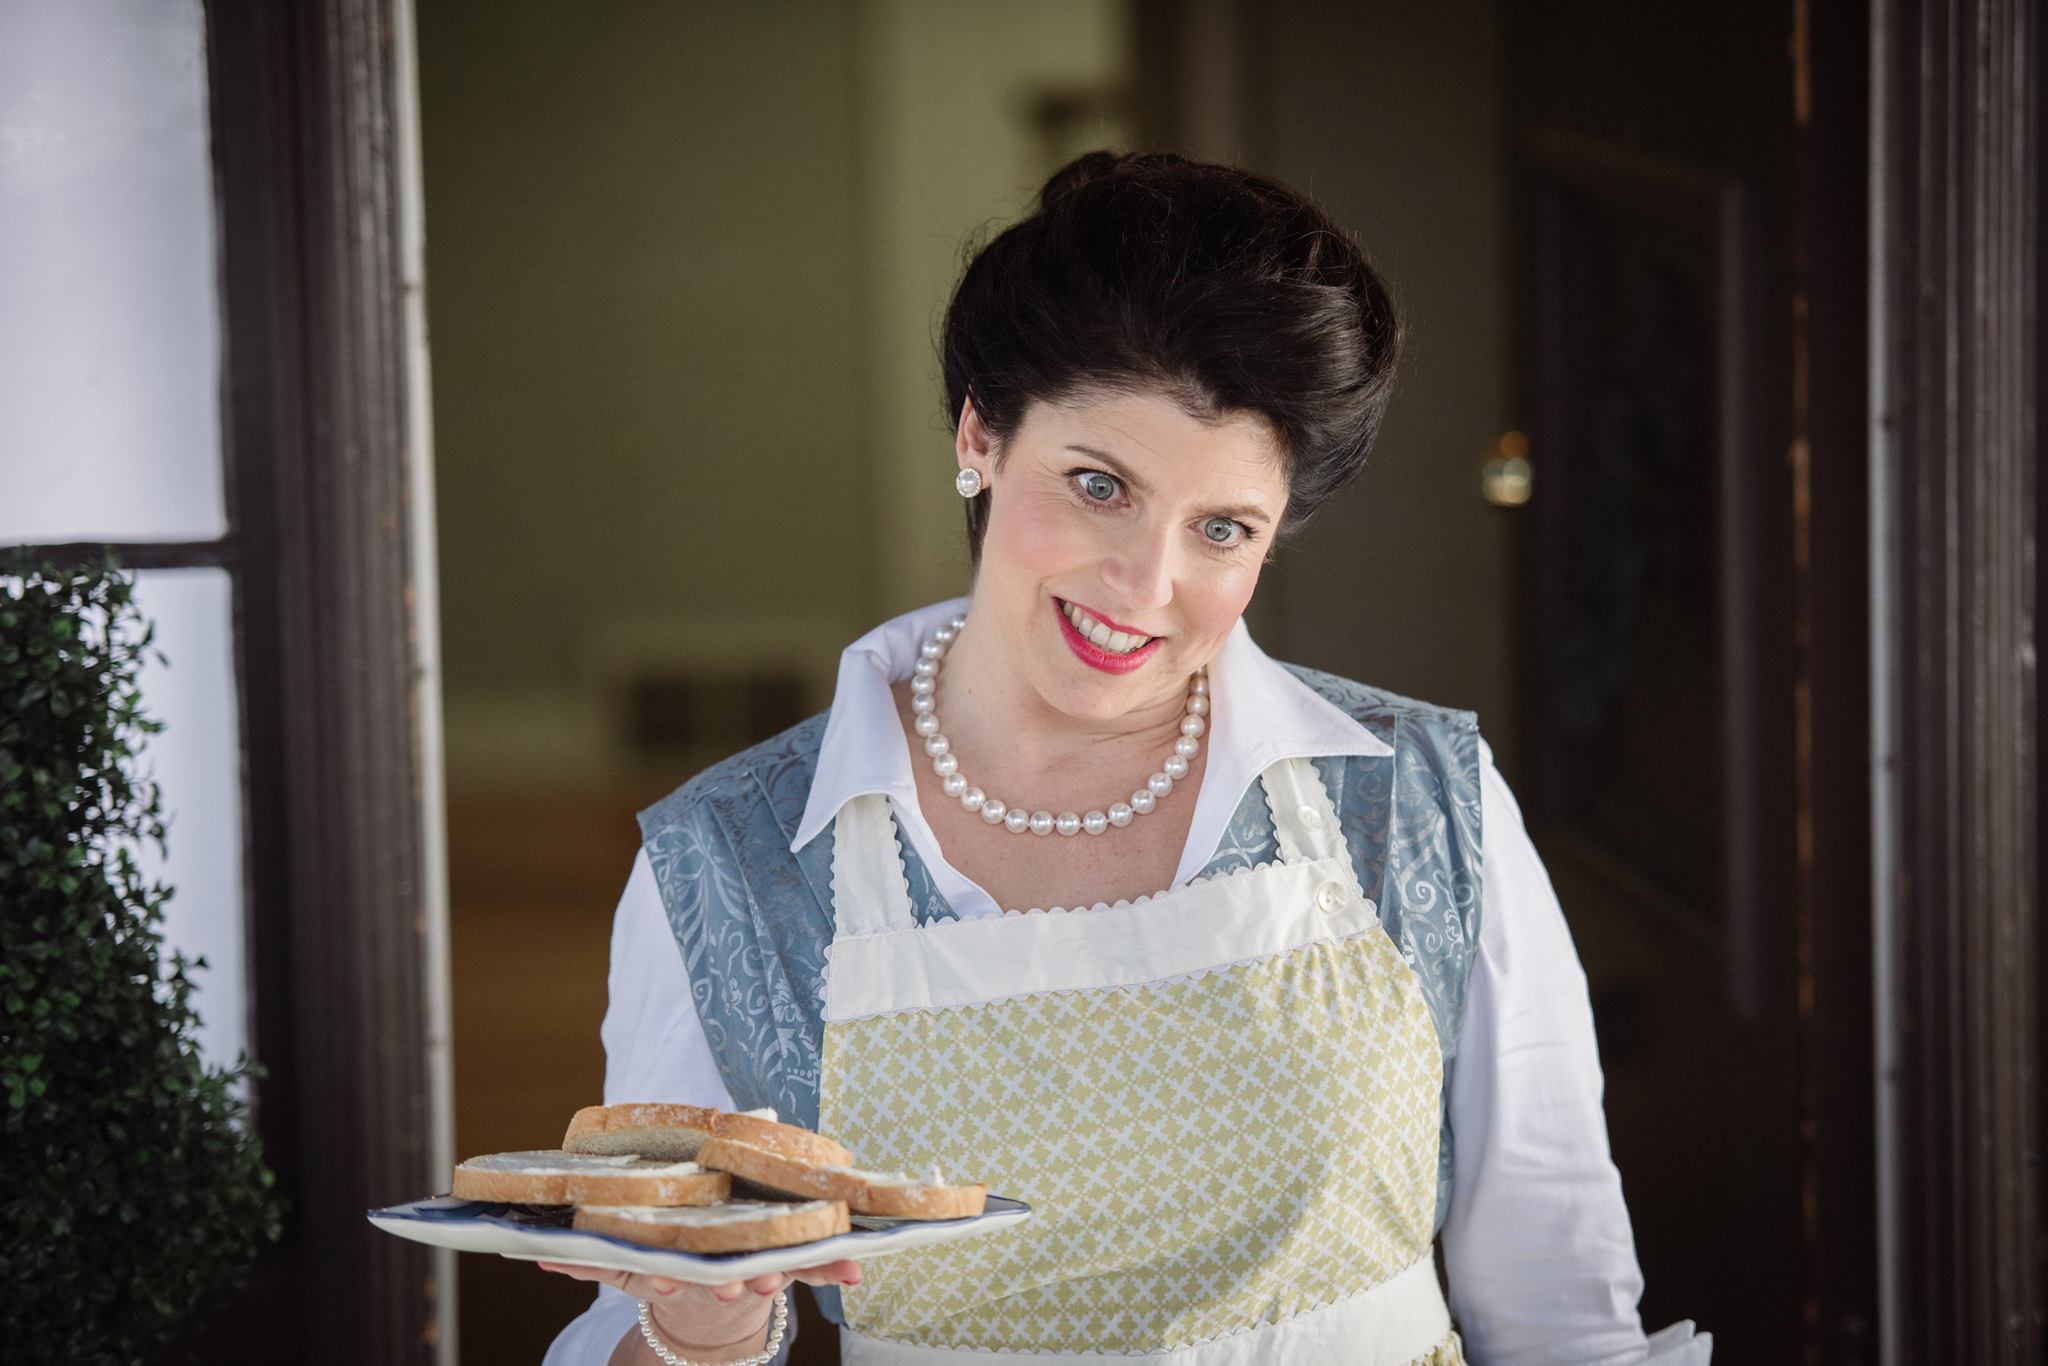 Michelle D'Alessandro Hatt as Mrs. Swanson in Guess Who's Not Coming to Breakfast, Lunch or Dinner?